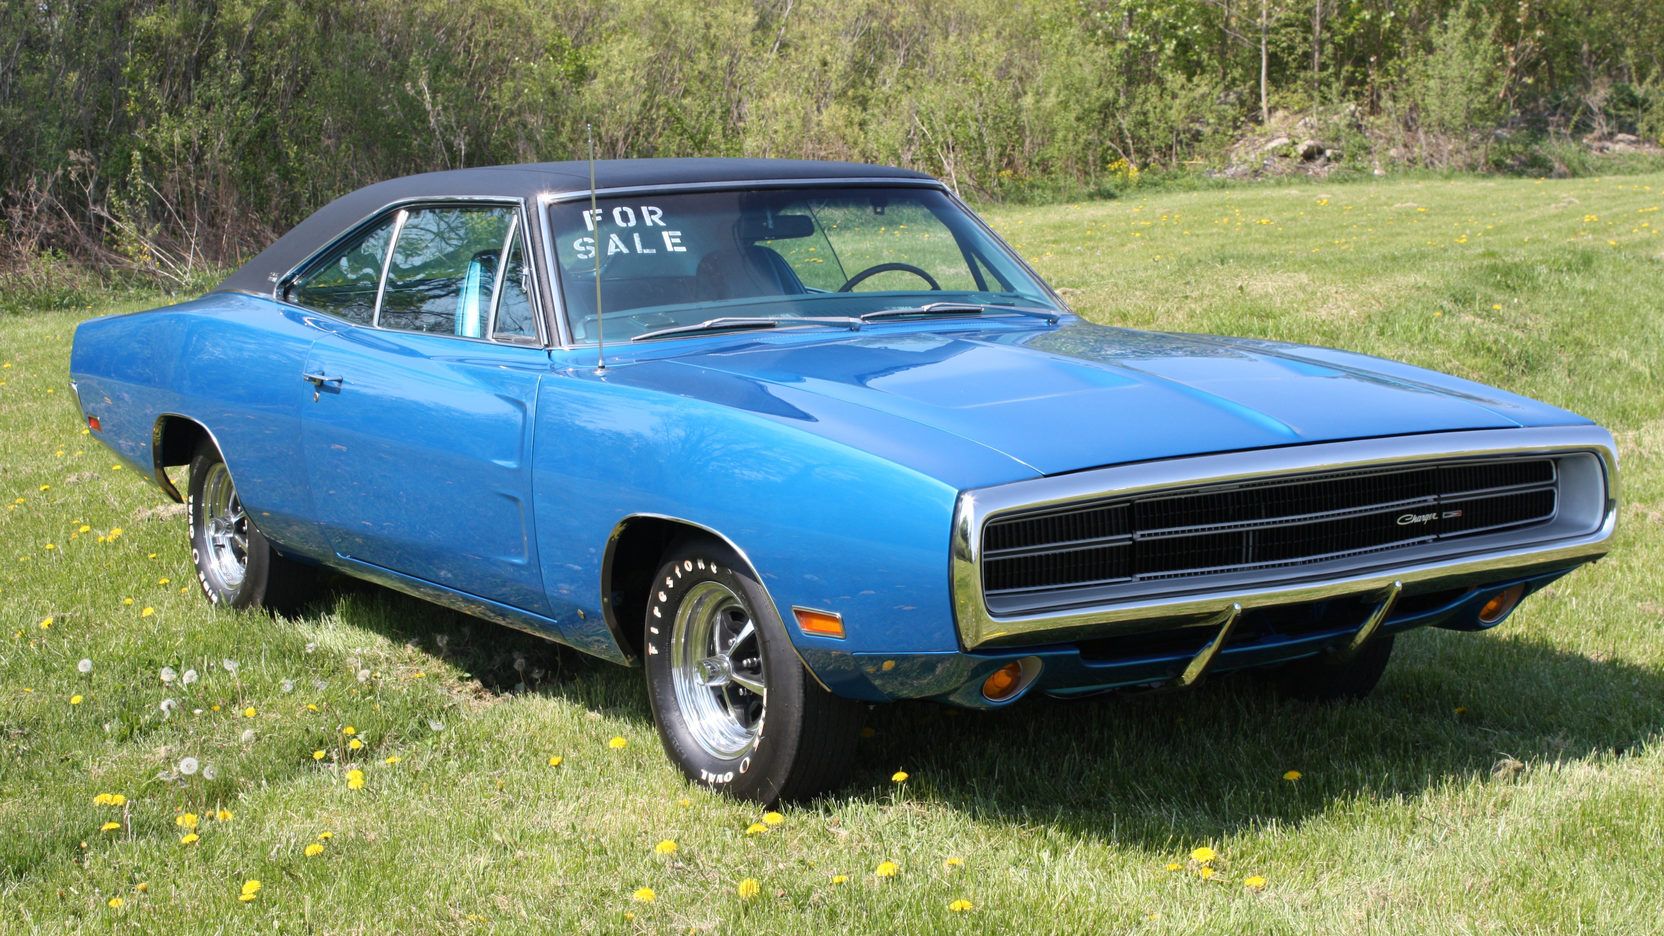 7 Interesting Facts About the Dodge Charger